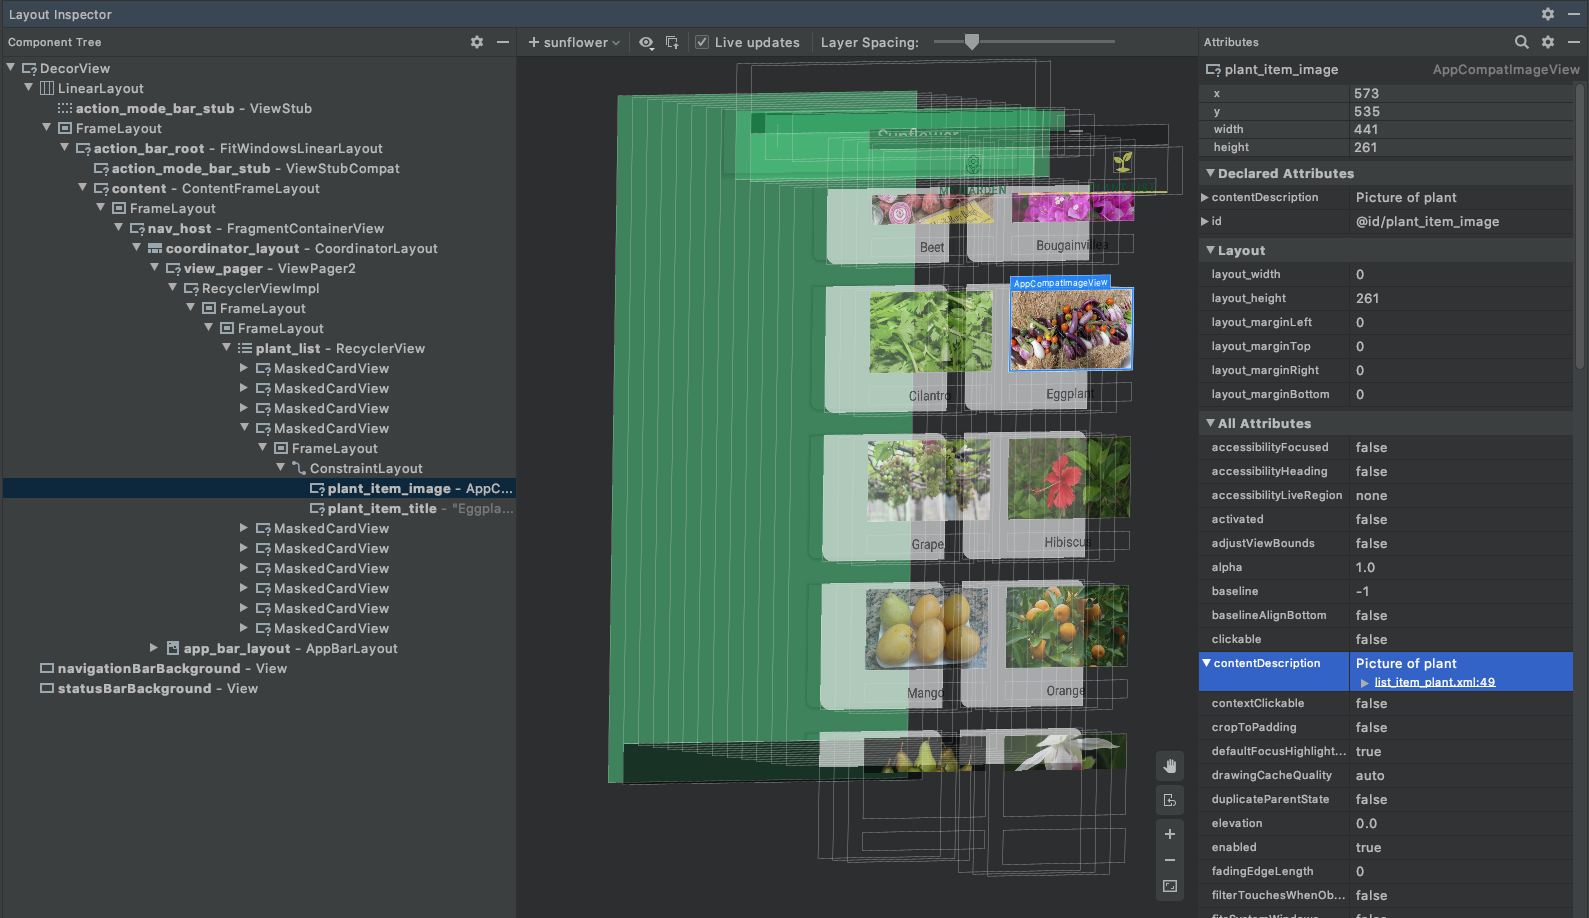 Android Studio 4.0 supports Live Layout inspecting